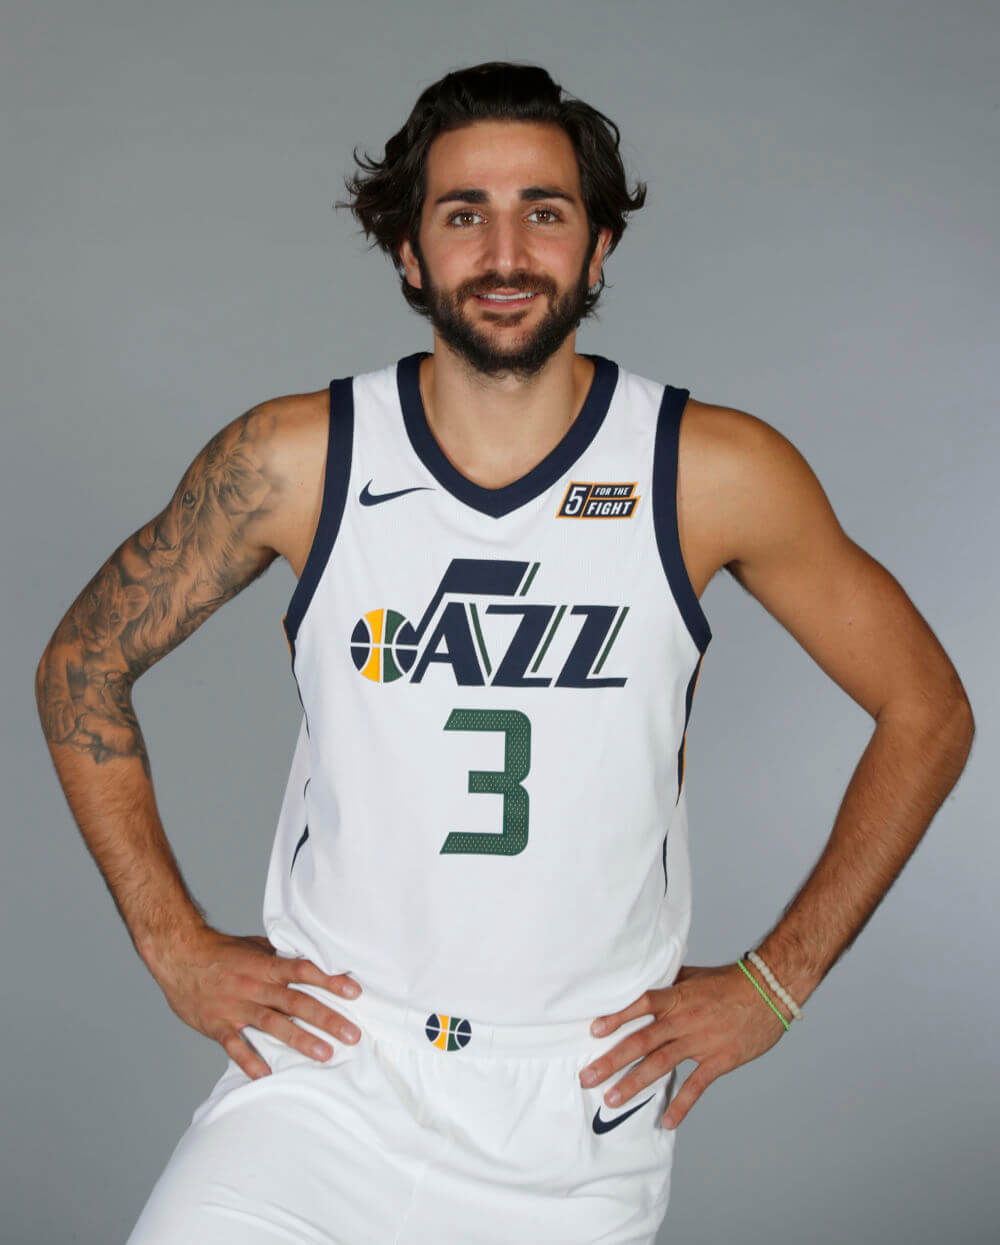 Utah Jazz's Ricky Rubio, poses for a picture at their media day, Monday, Sept. 25, 2017, in Salt Lake City. (AP Ph,oto/George Frey)